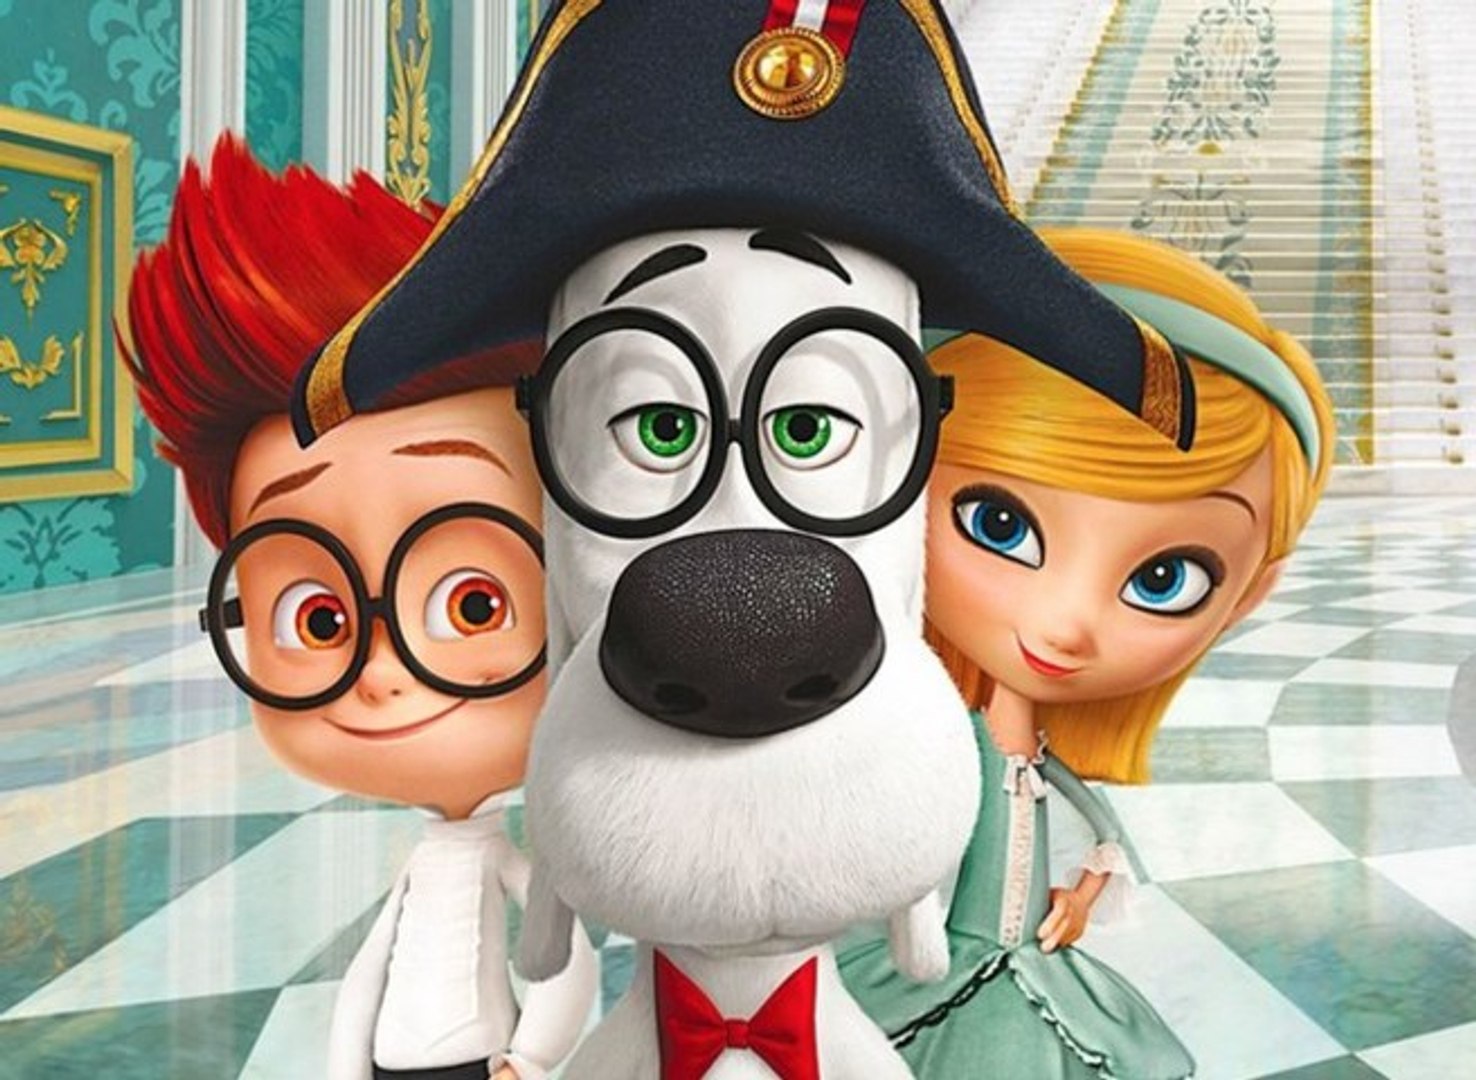 Mister peabody and sherman 2